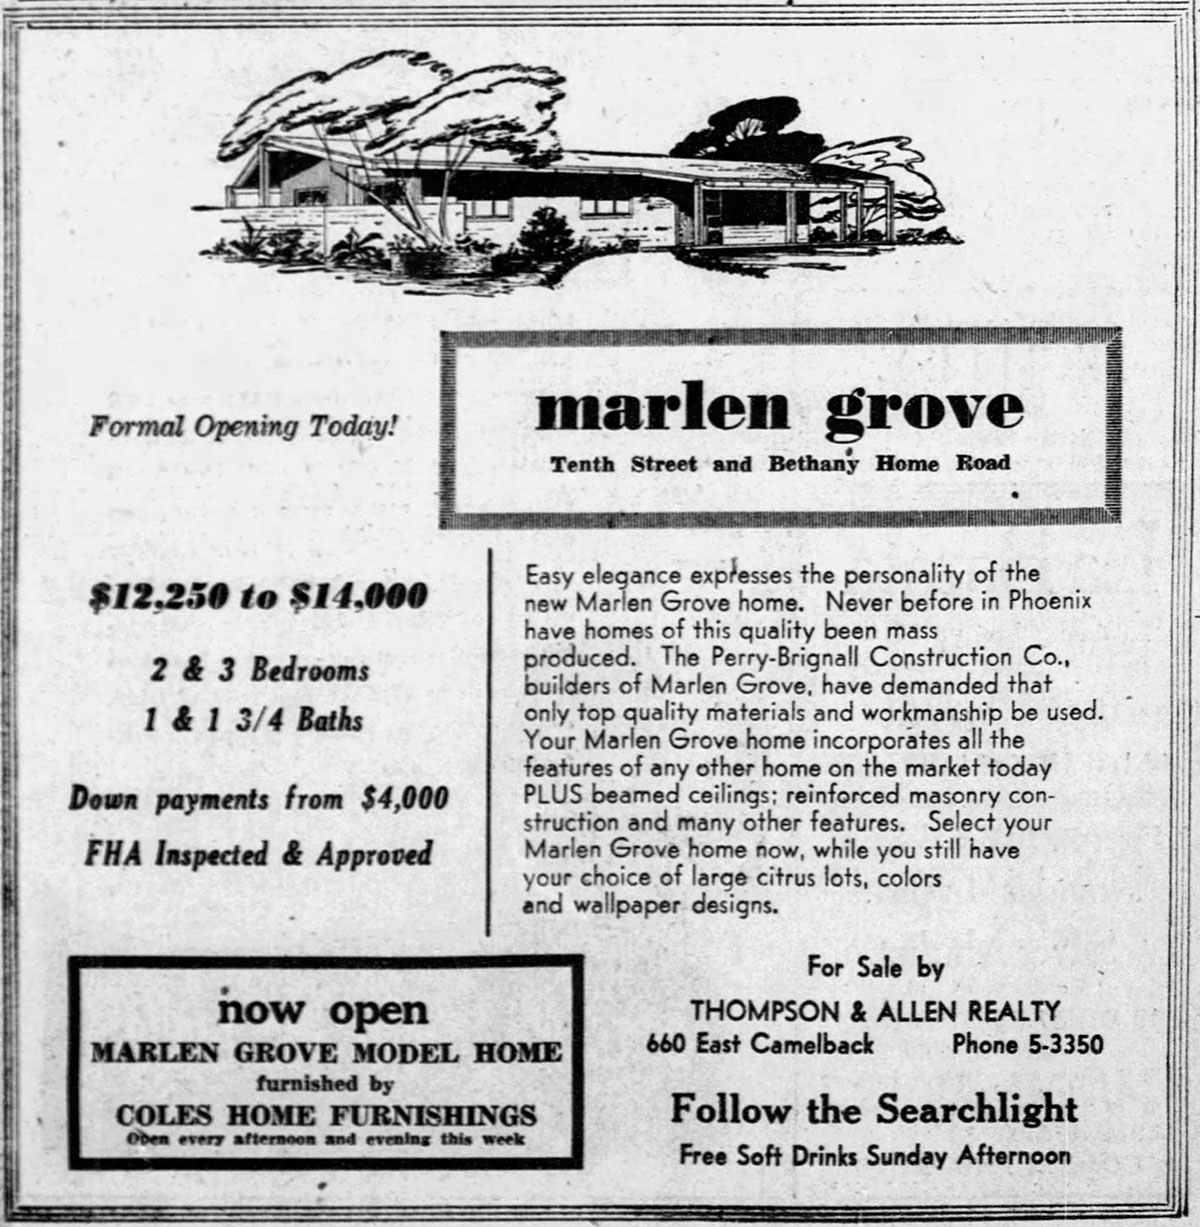 Vintage ad for Marlen Grove by Ralph Haver